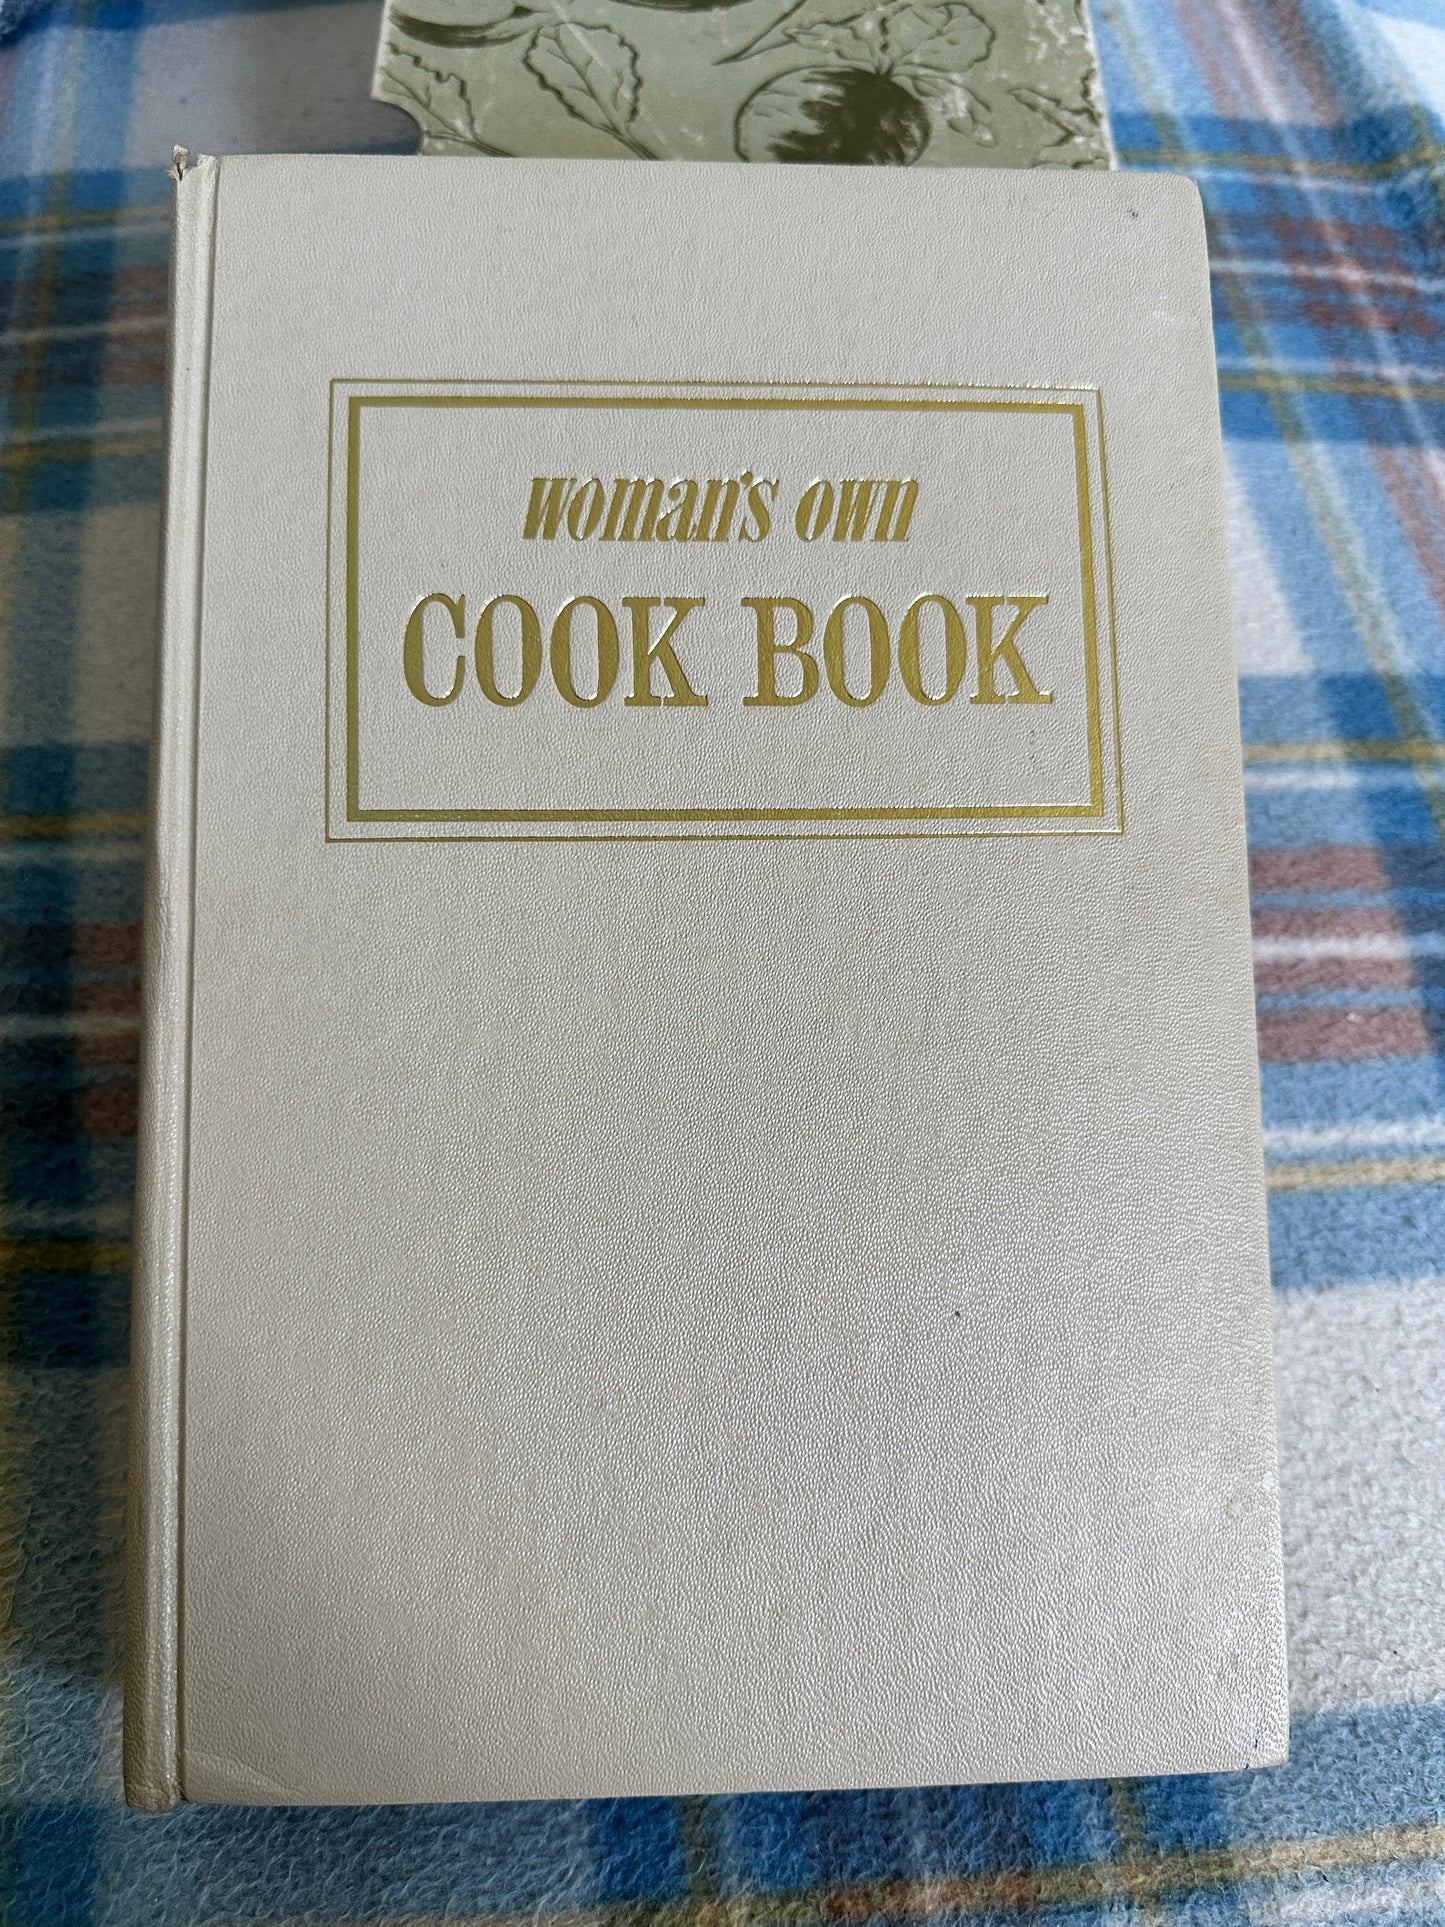 1964 Woman’s Own Cook Book in Slip Case - George Newnes Publisher